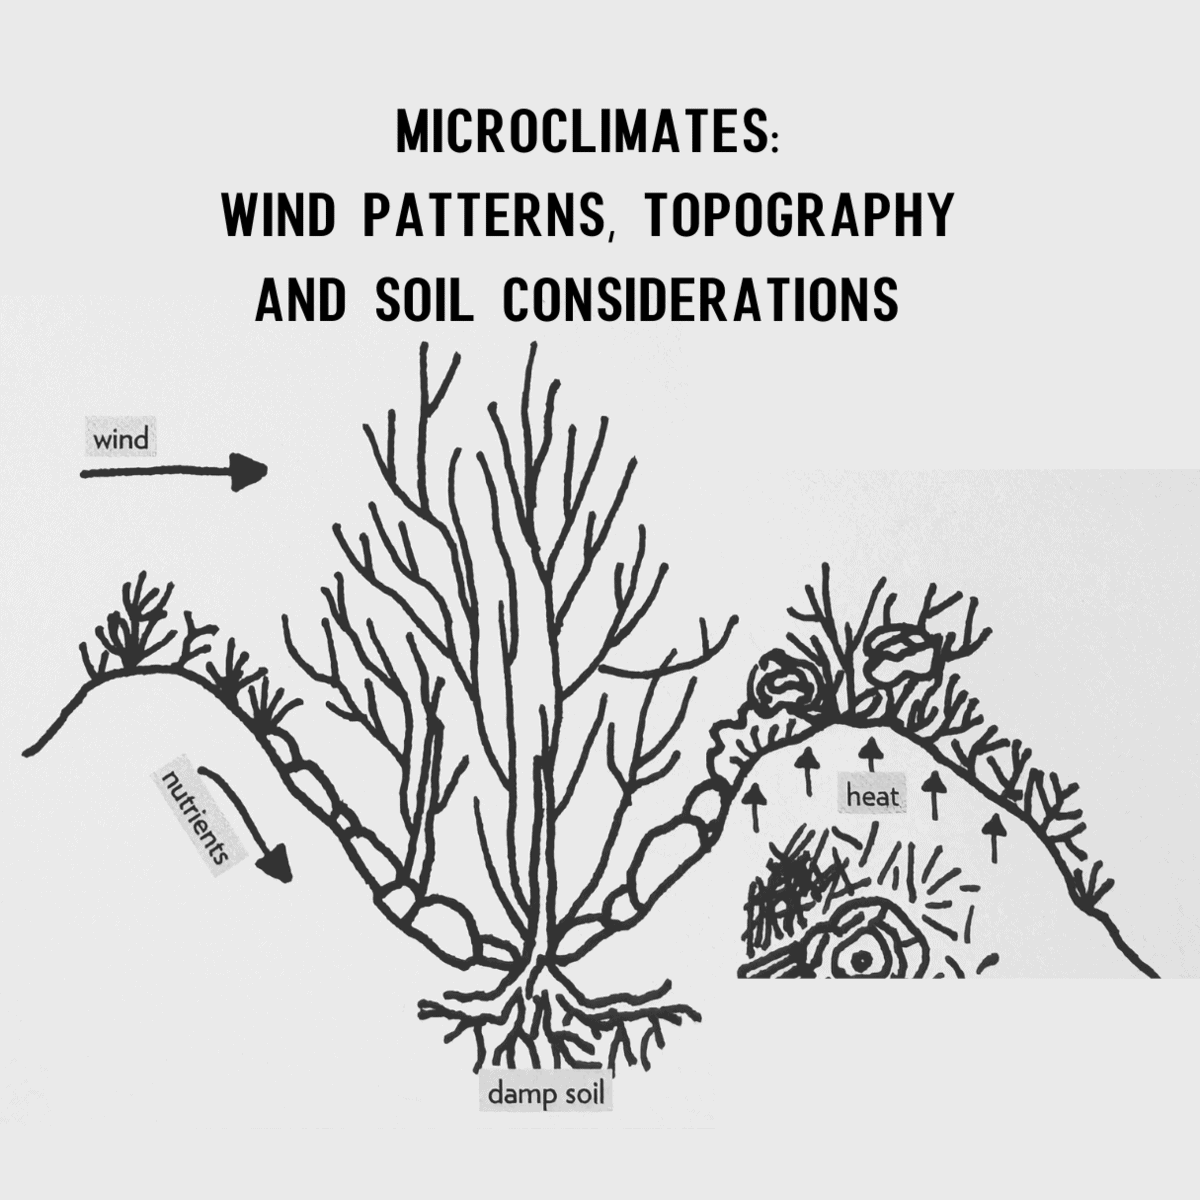 Diagram showing microclimates influenced by wind, soil type, and topography, illustrating how these factors affect plant growth.